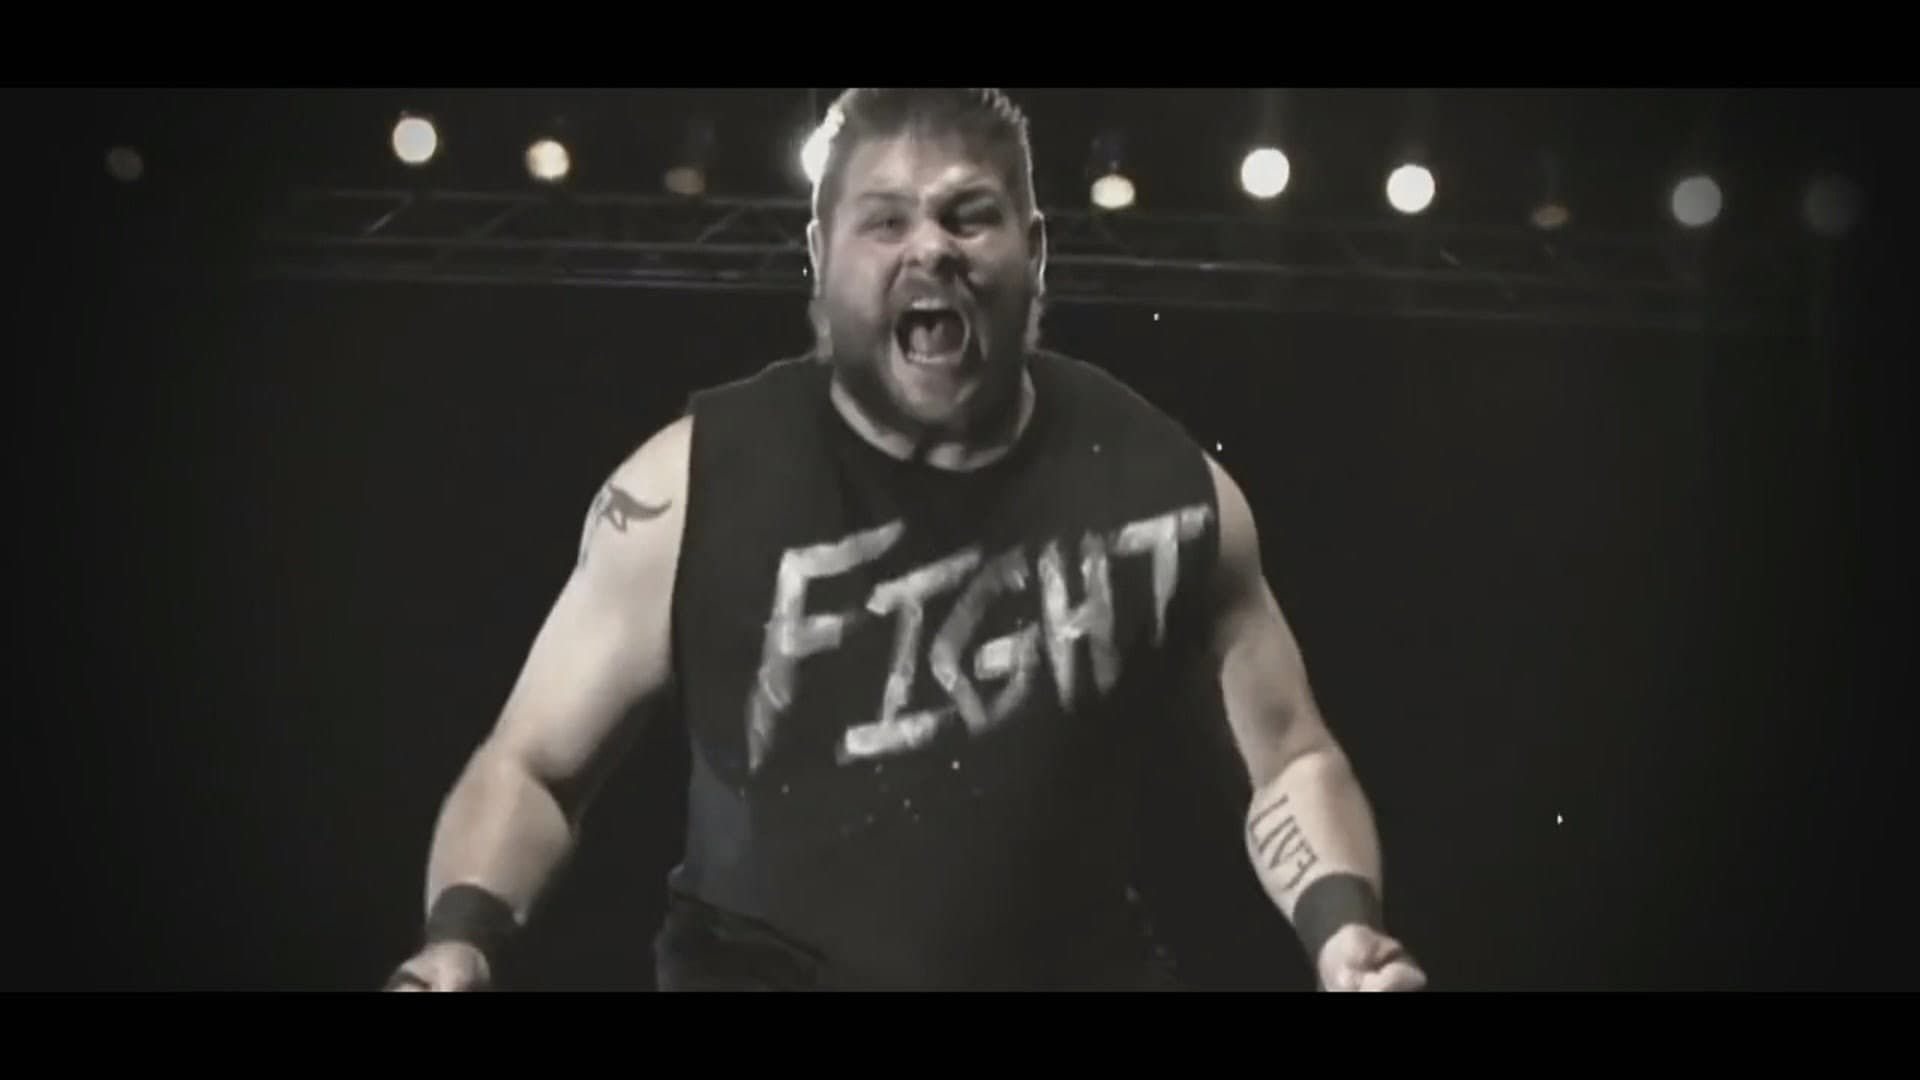 WWE: Fight Owens Fight - The Kevin Owens Story background